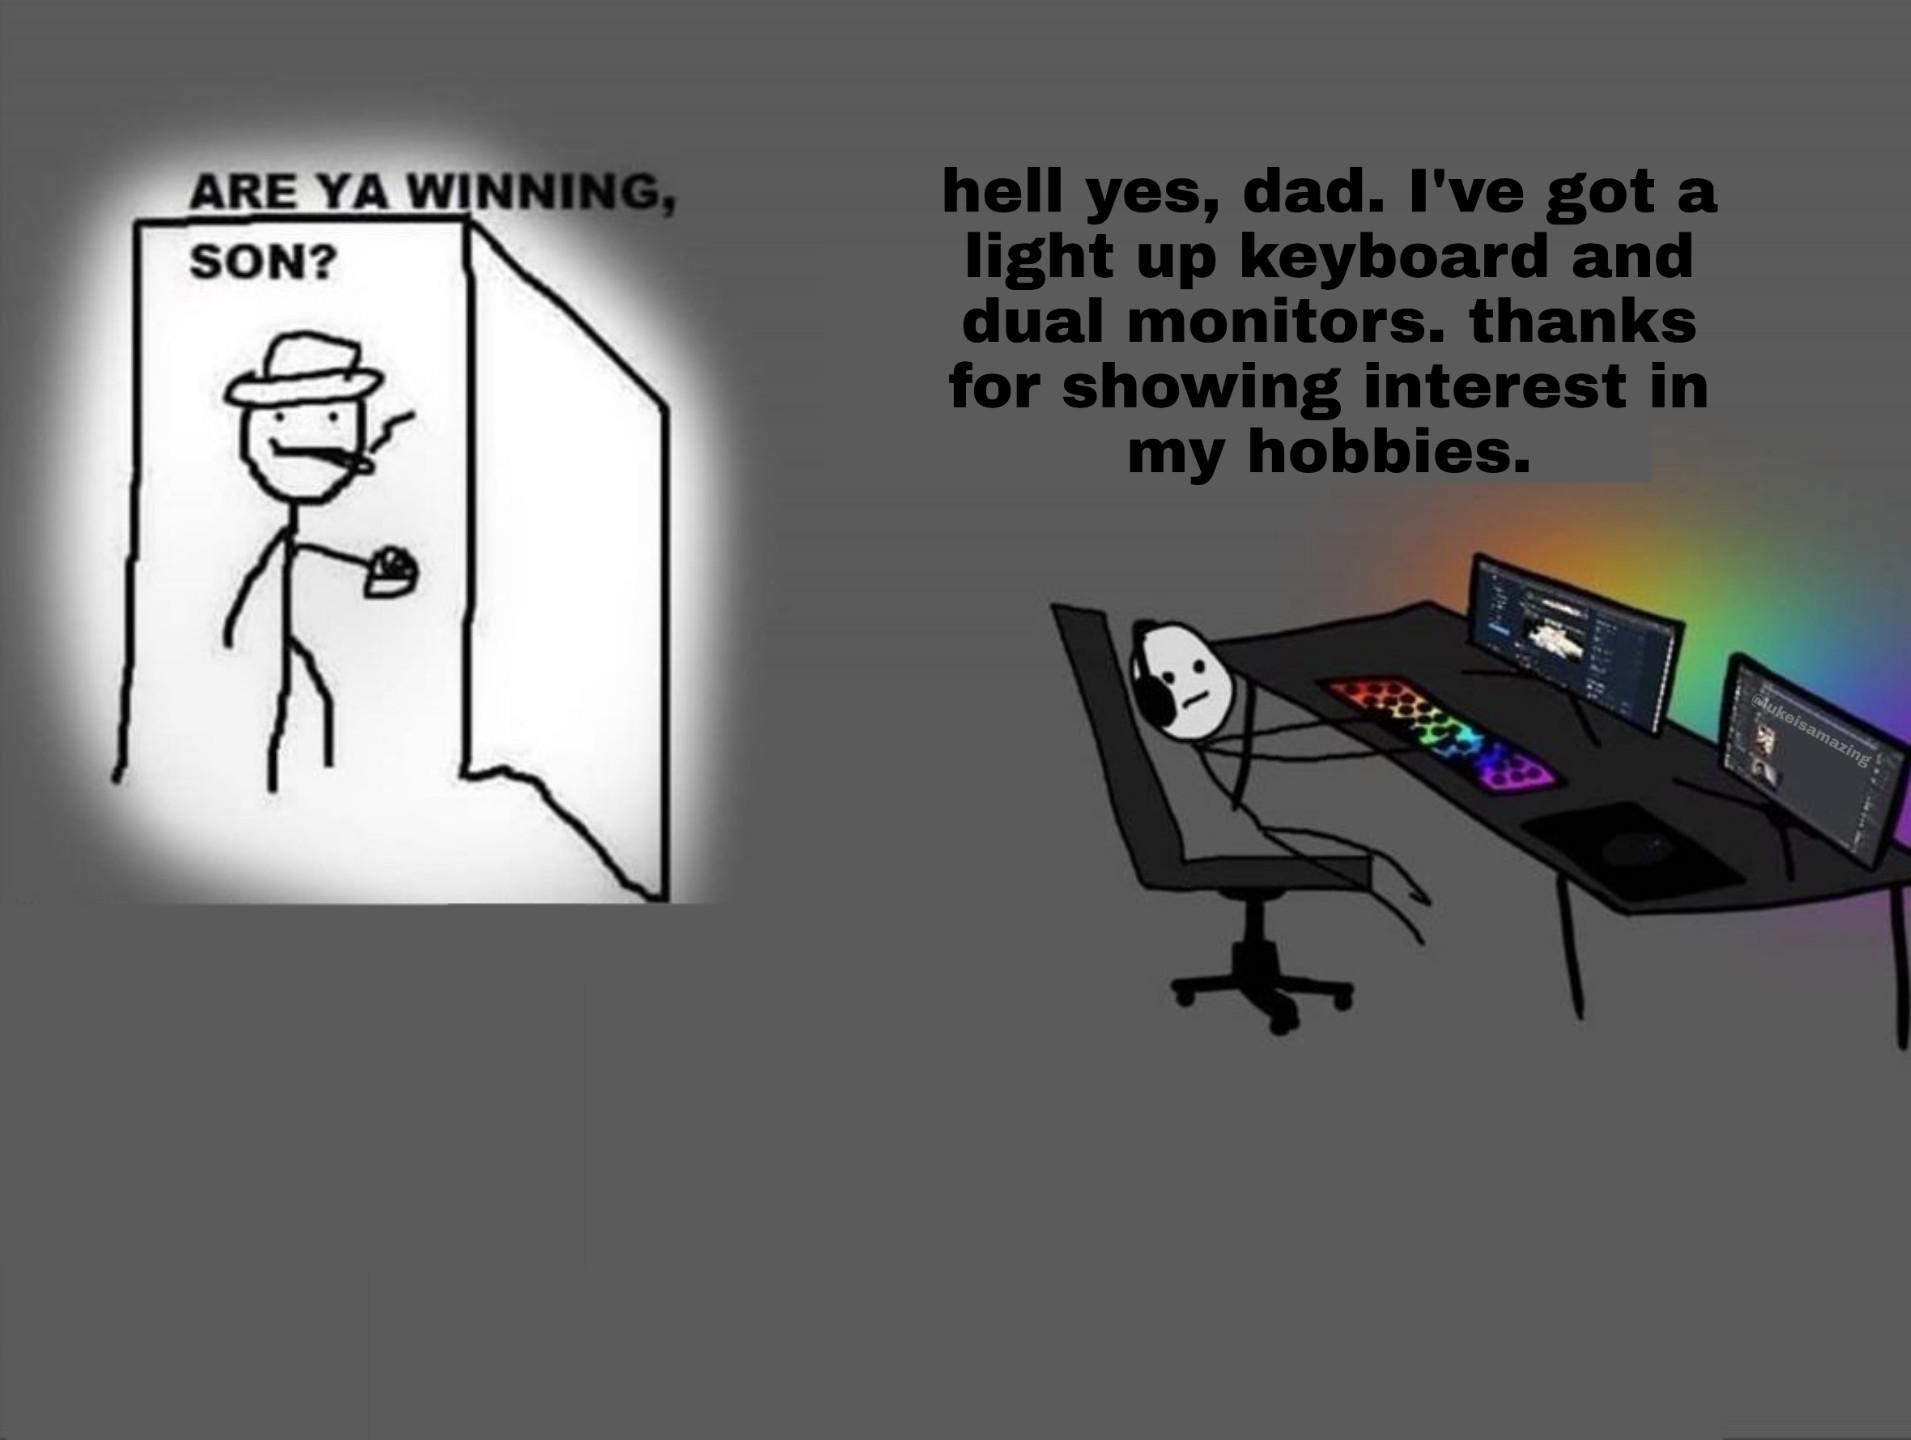 Dank, PC, Xbox, Dad, YouTube, Visit Dank Memes Dank, PC, Xbox, Dad, YouTube, Visit text: ARE YA WINNING, soN? hell yes, dad. I've got a light up keyboard and dual monitors. thanks for showing interest in my hobbies. 